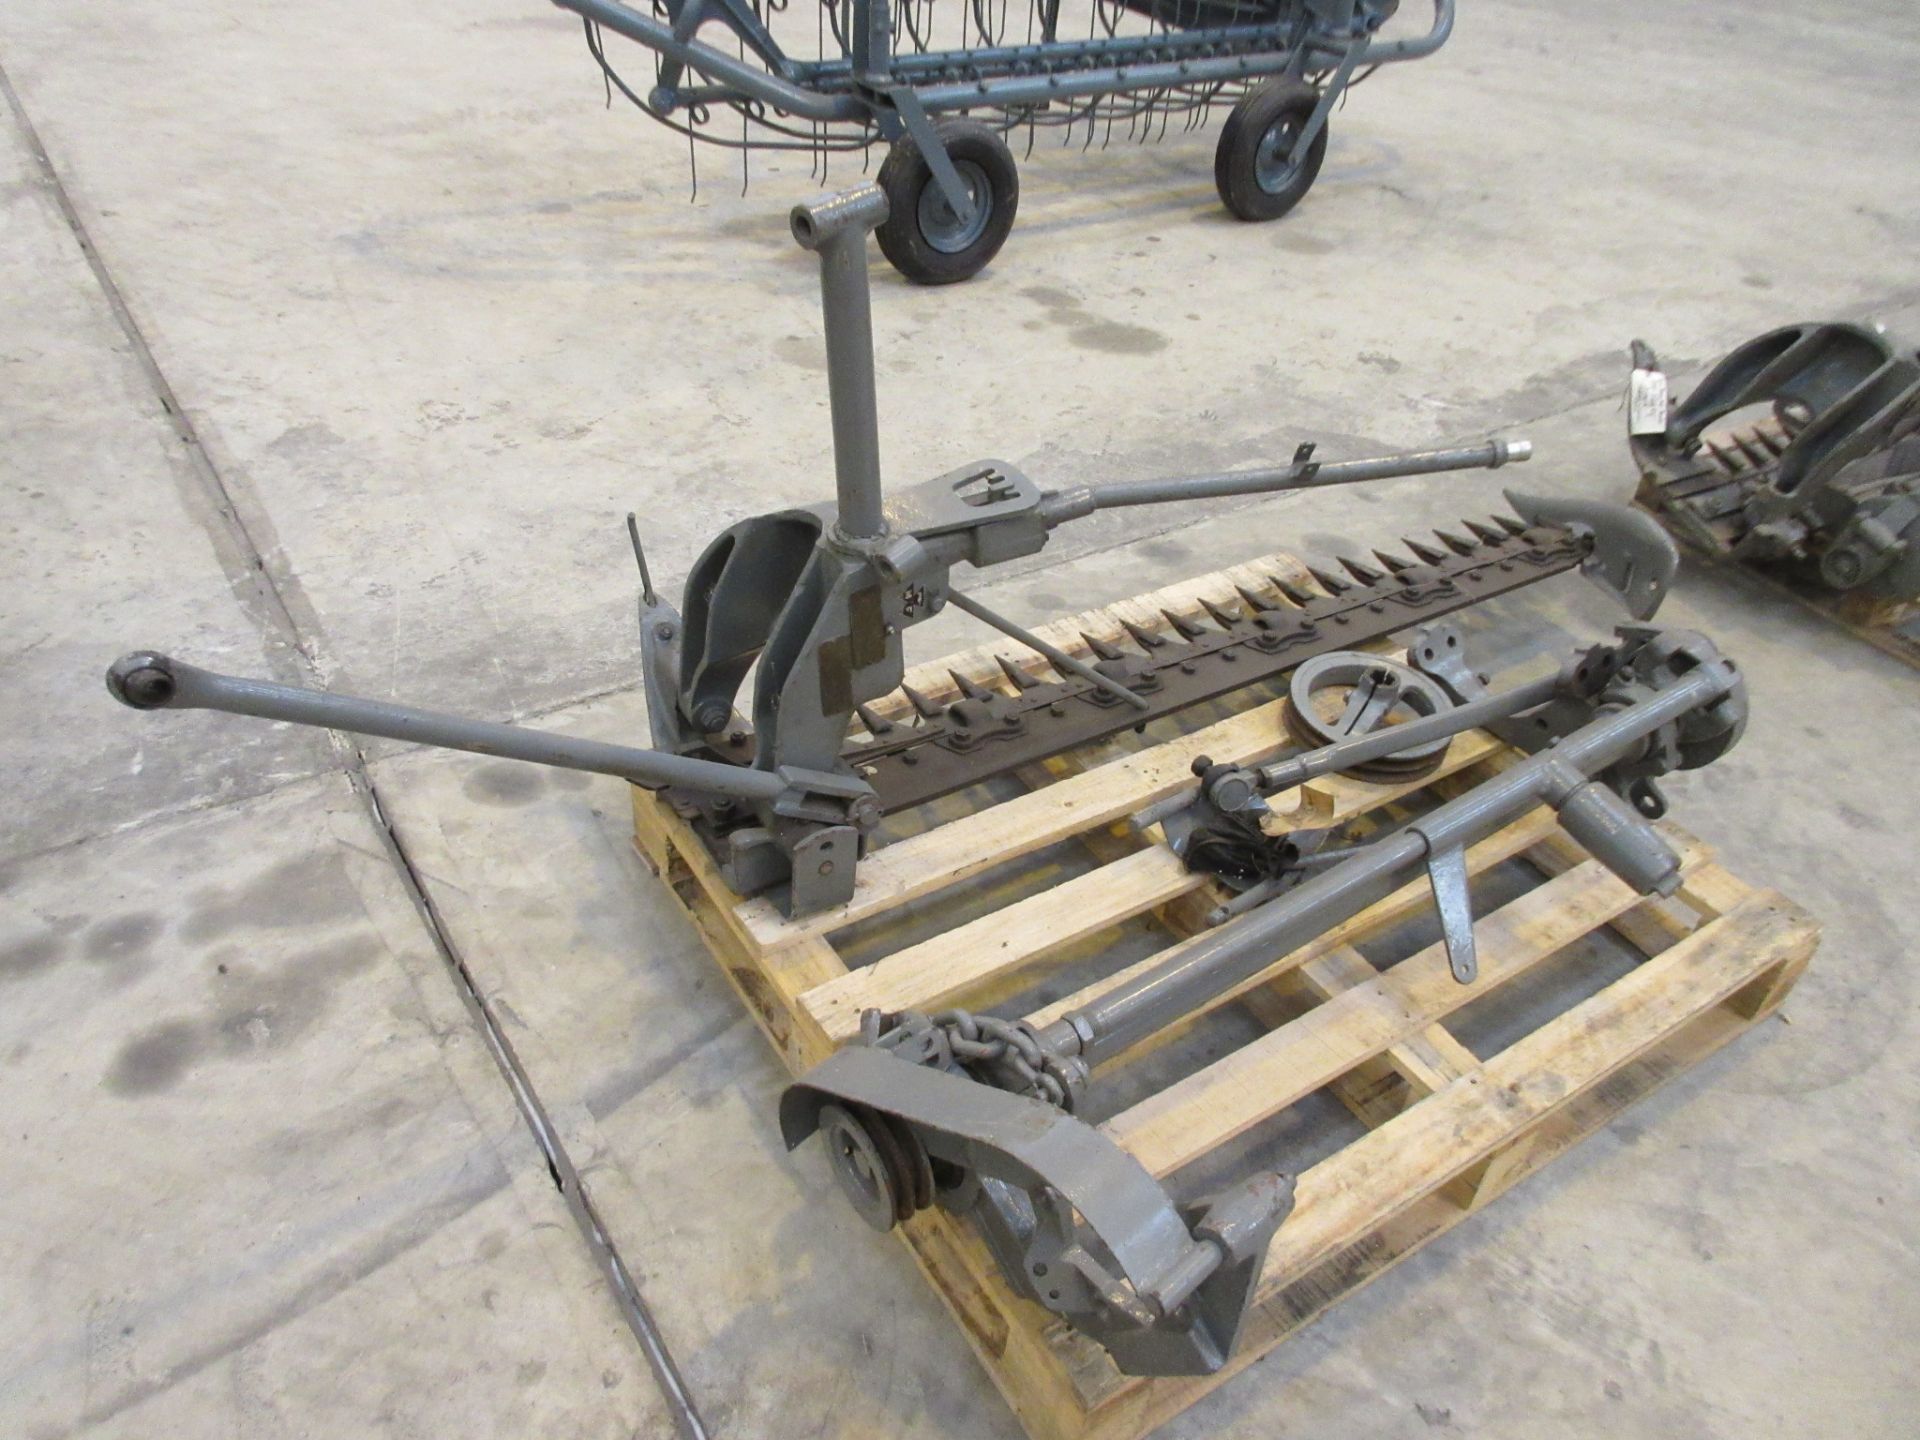 Massey Ferguson 5ft mid-mounted mower, dismantled but believed to be complete, Model 779 Sn.F6893